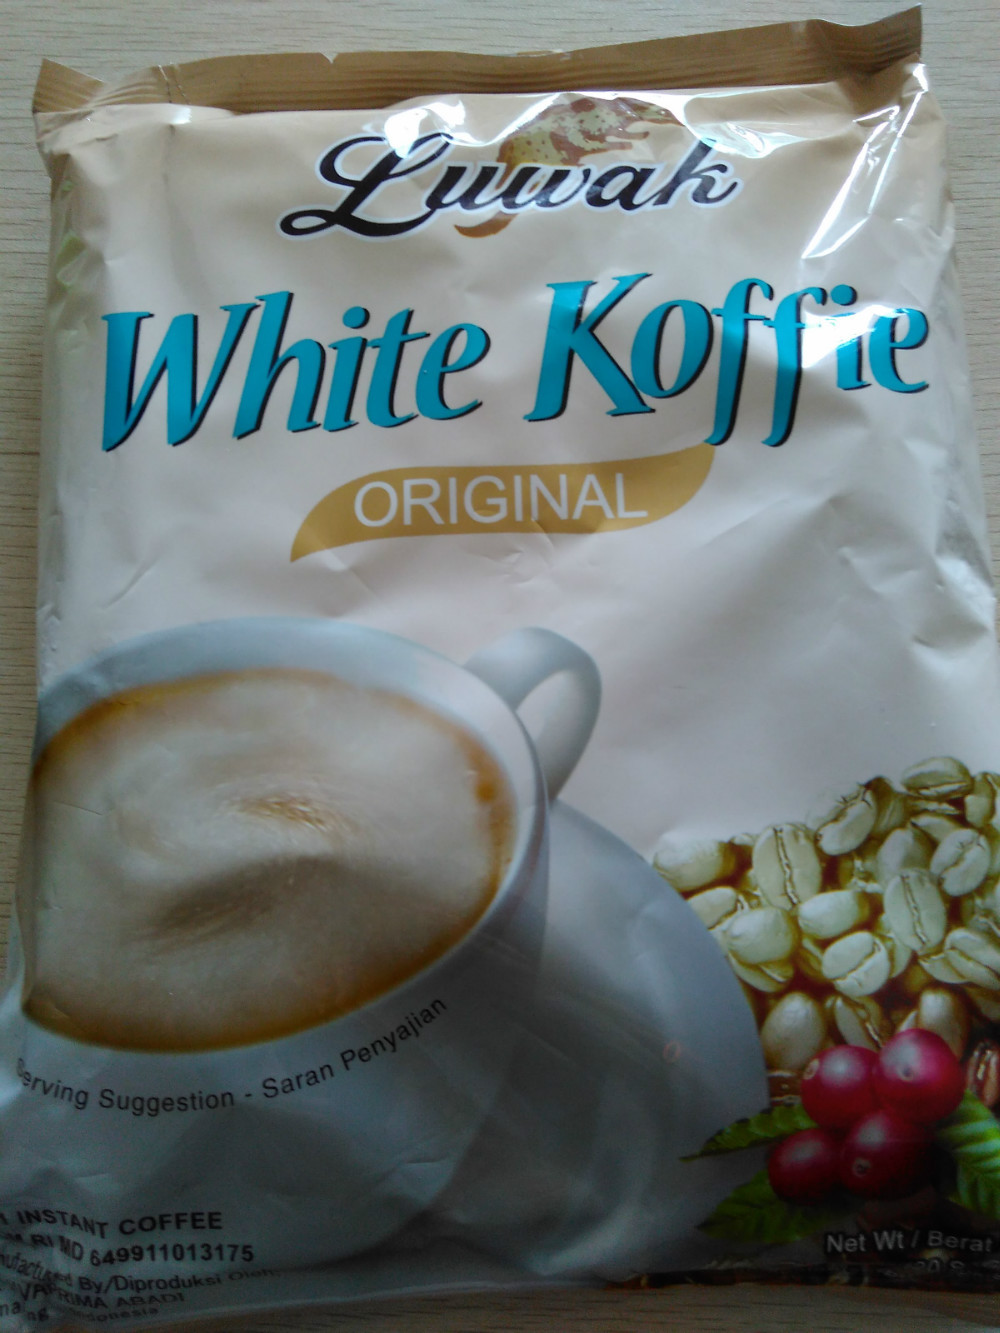 Luwak White Koffie Indonesia 3 in 1 instant coffee white 400g free shipping Promotional explosion models